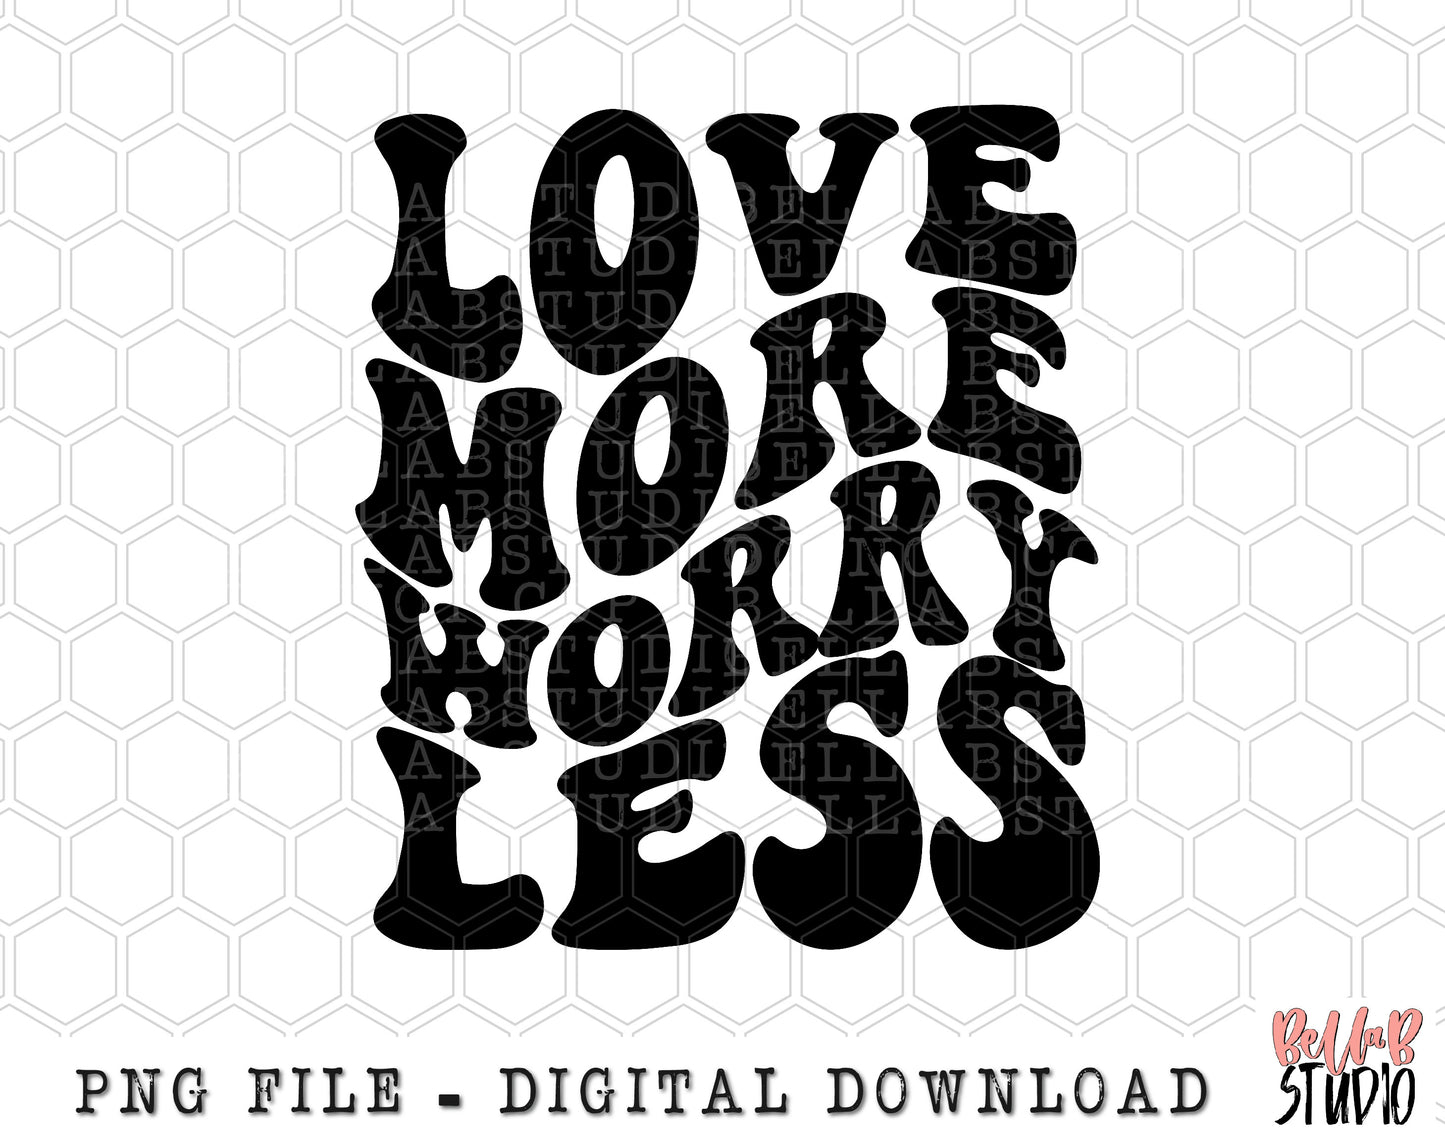 Love More Worry Less Wavy Retro PNG Sublimation Design